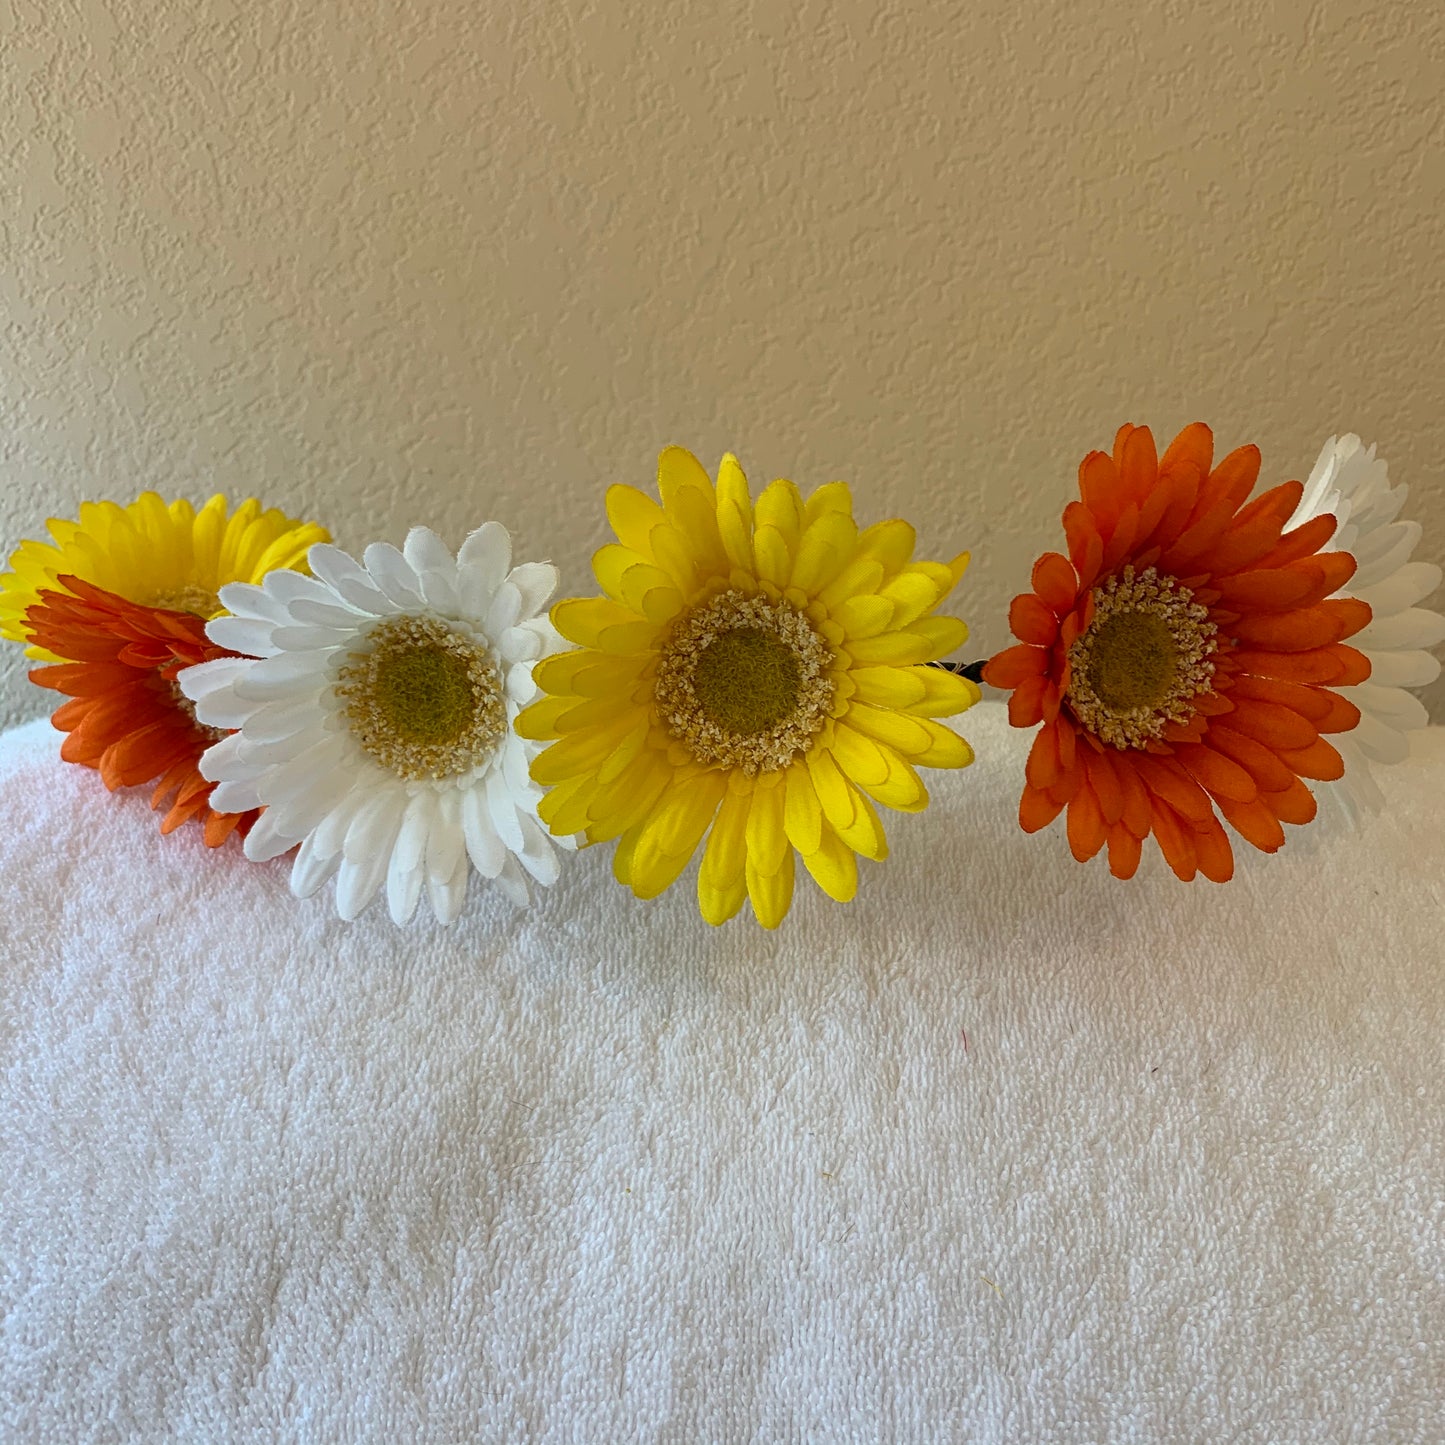 Large Wreath Lighted - Yellow, White, and Orange Daisies